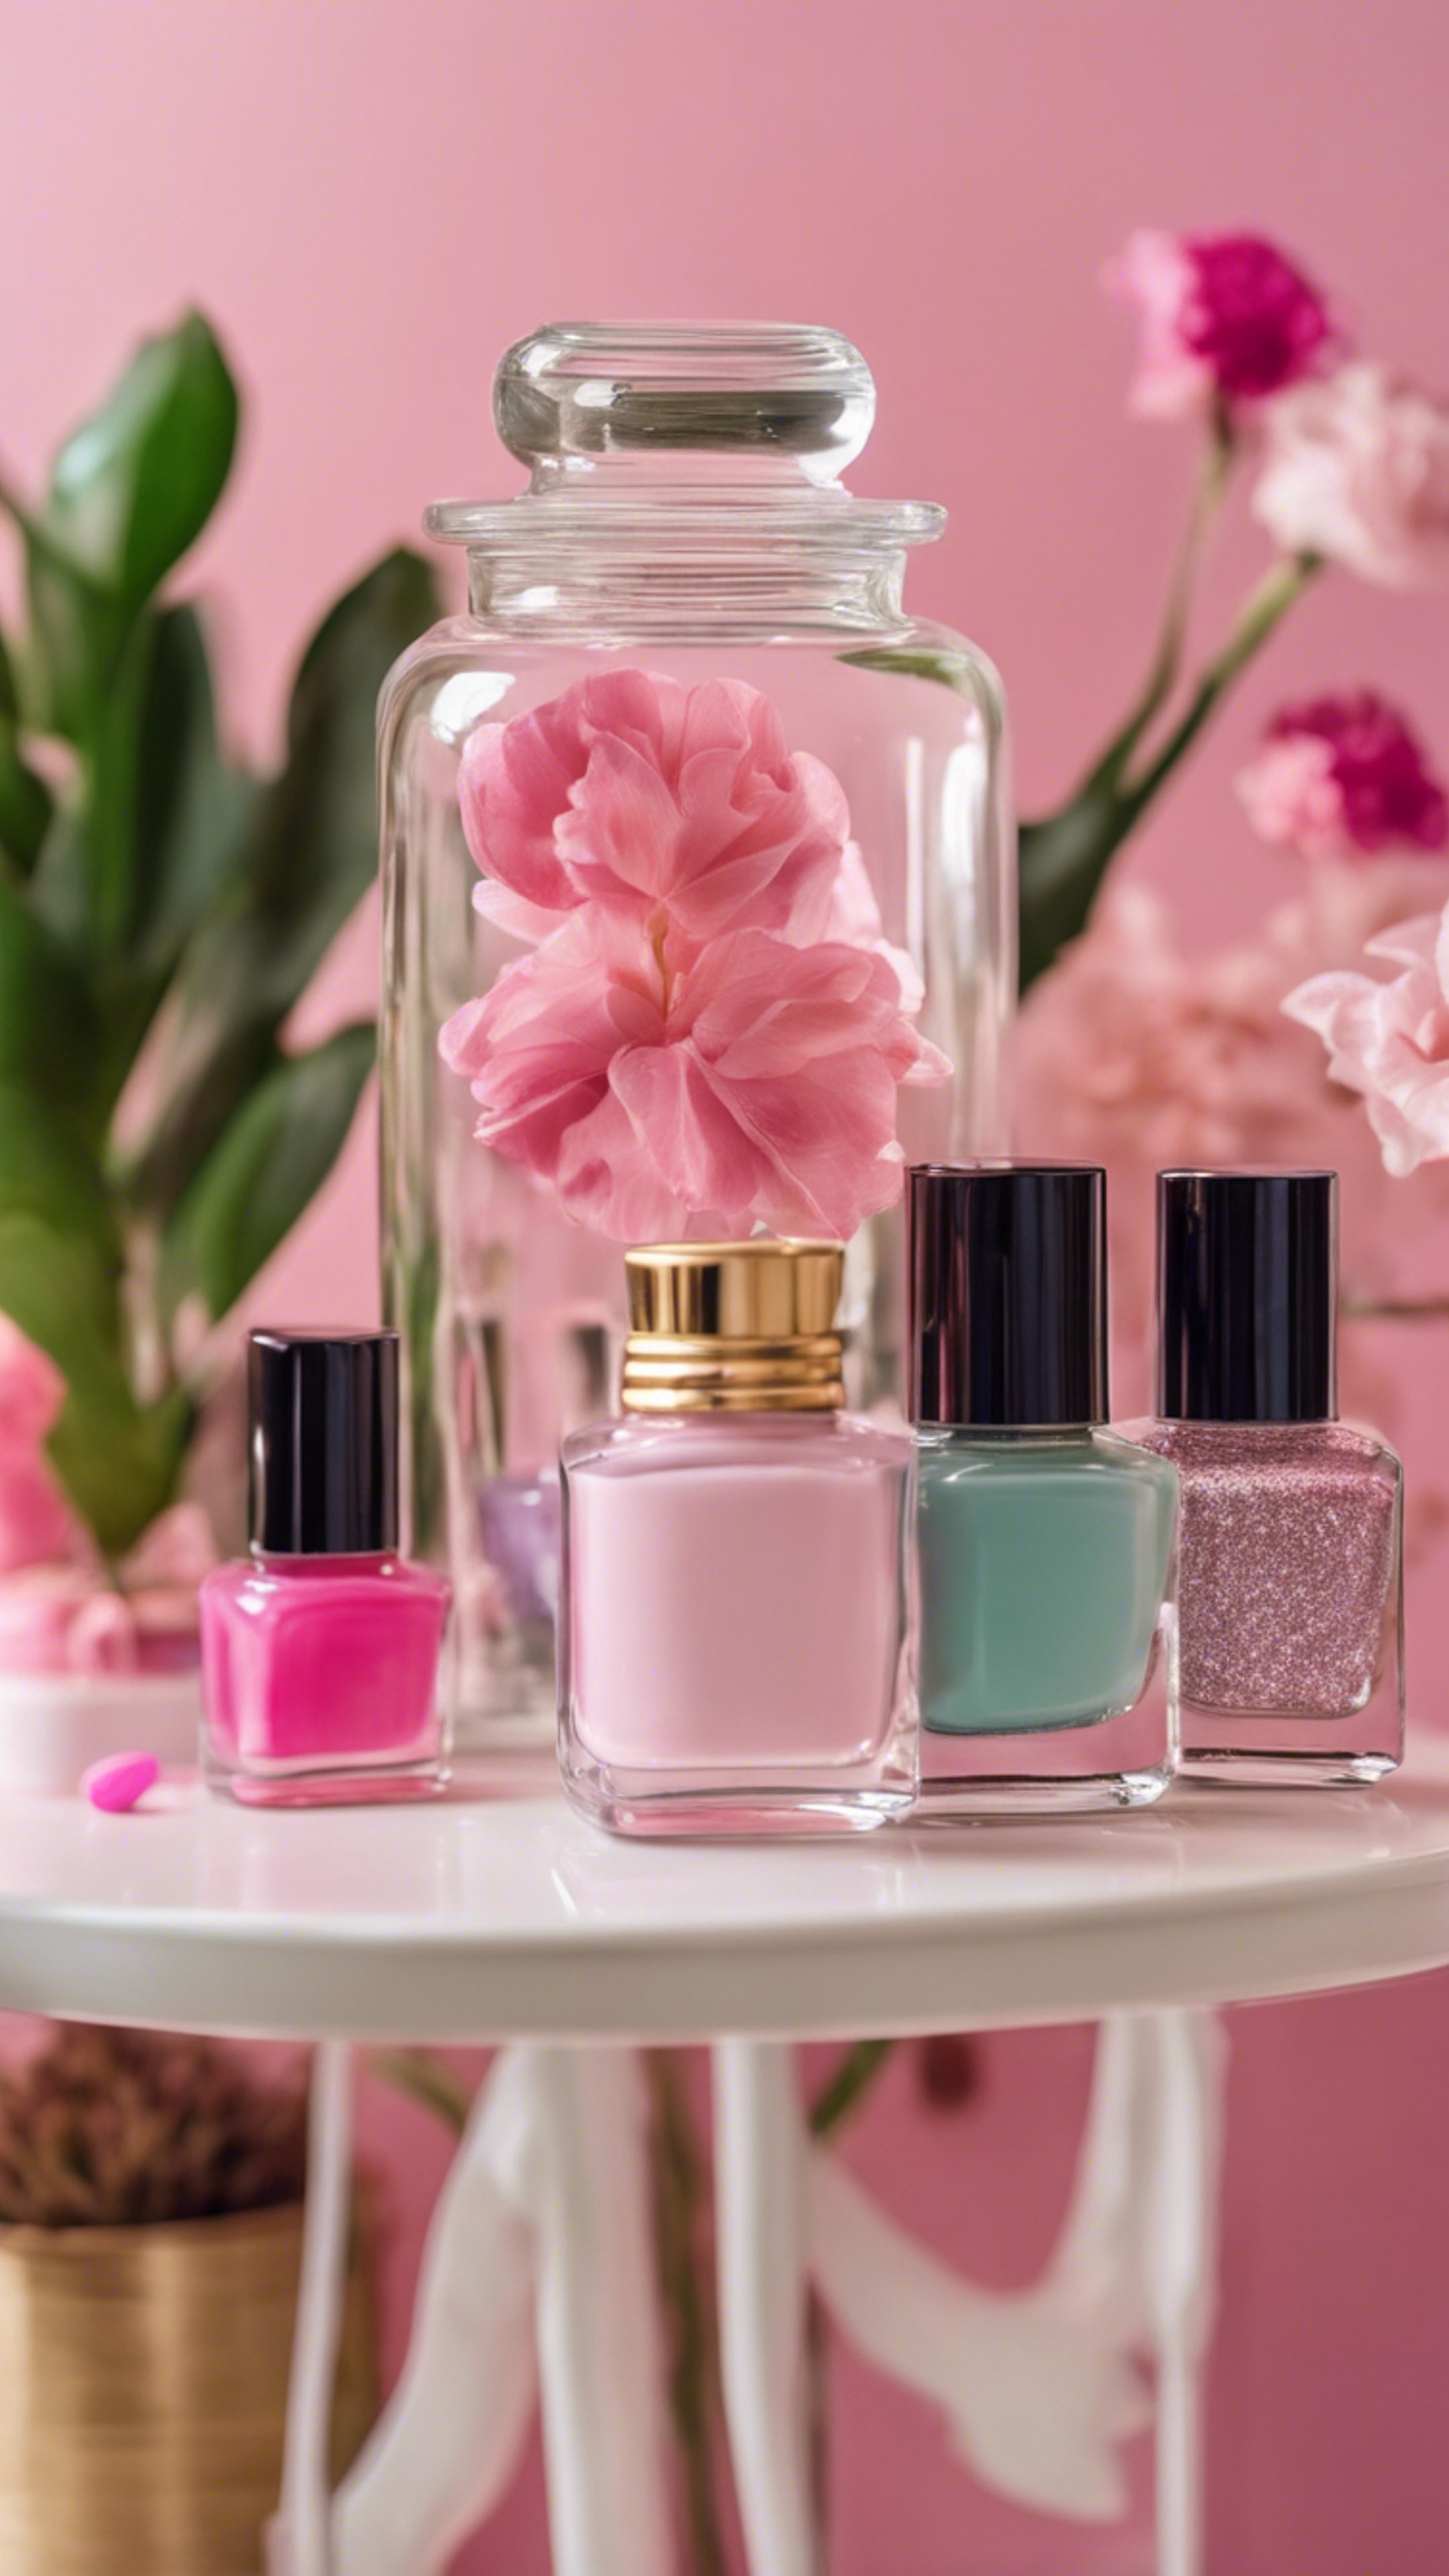 A glass jar full of colorful girly nail polishes on a pink dressing table with a chic plant in the background. کاغذ دیواری[6e6d72fe0d8e4450902a]